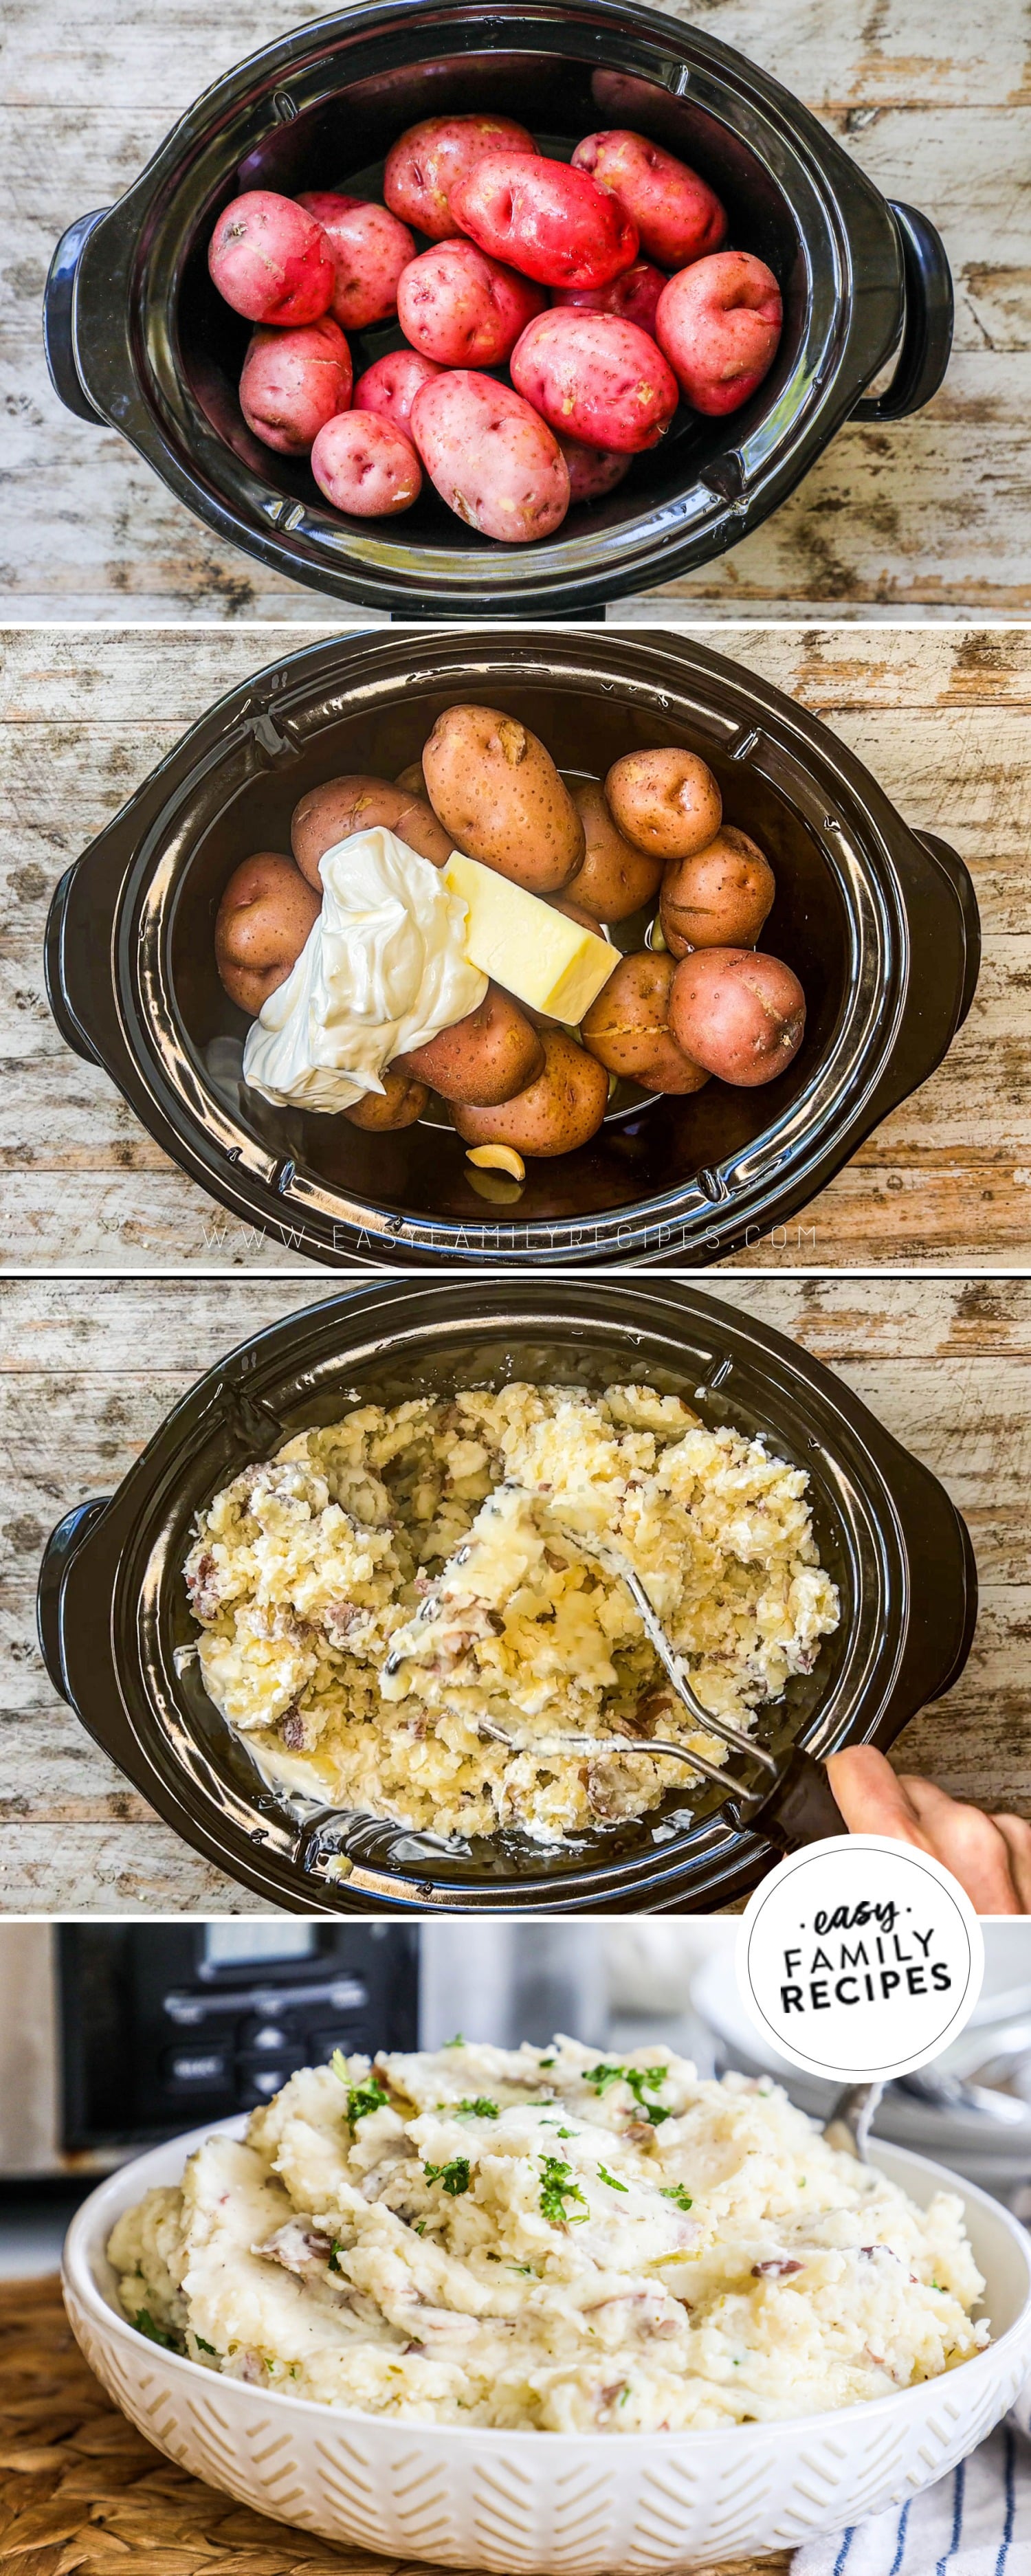 how to make garlic mashed potatoes in the crockpot: 1)cook the potatoes, 2)add the butter and sour cream, 3)mash, 4)serve!